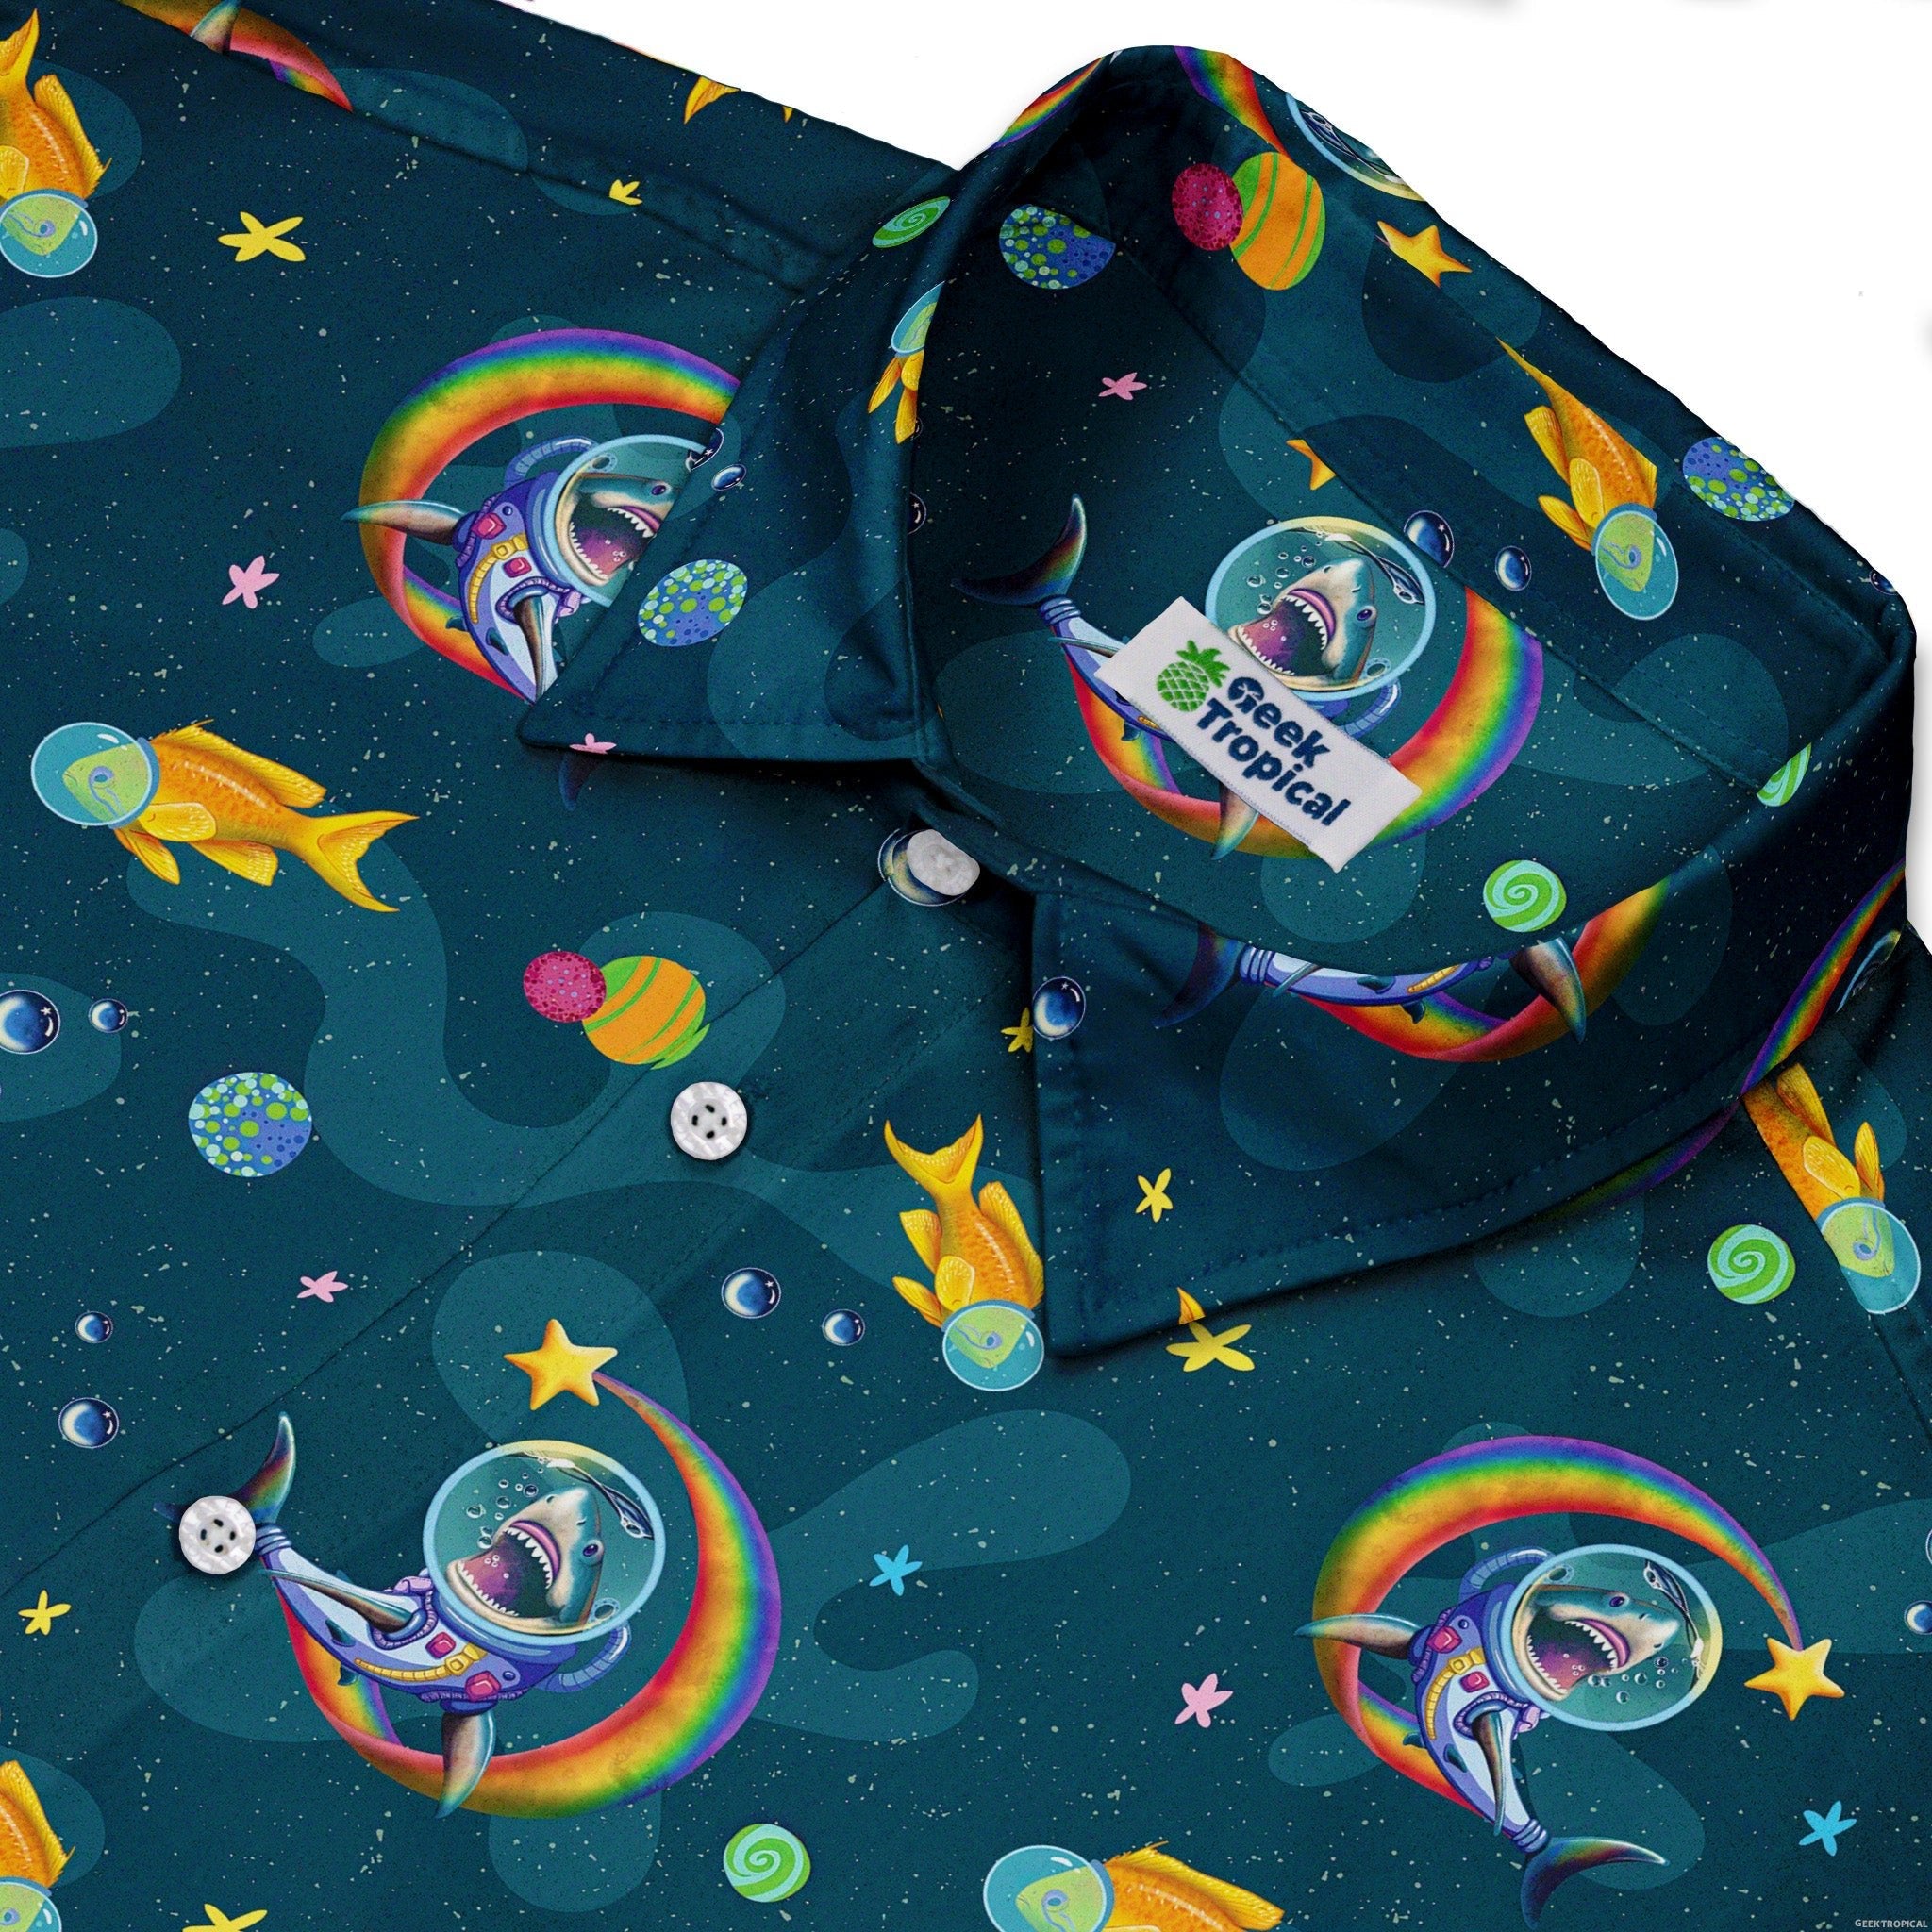 Space Sharks Button Up Shirt - adult sizing - Animal Patterns - Design by Carla Morrow